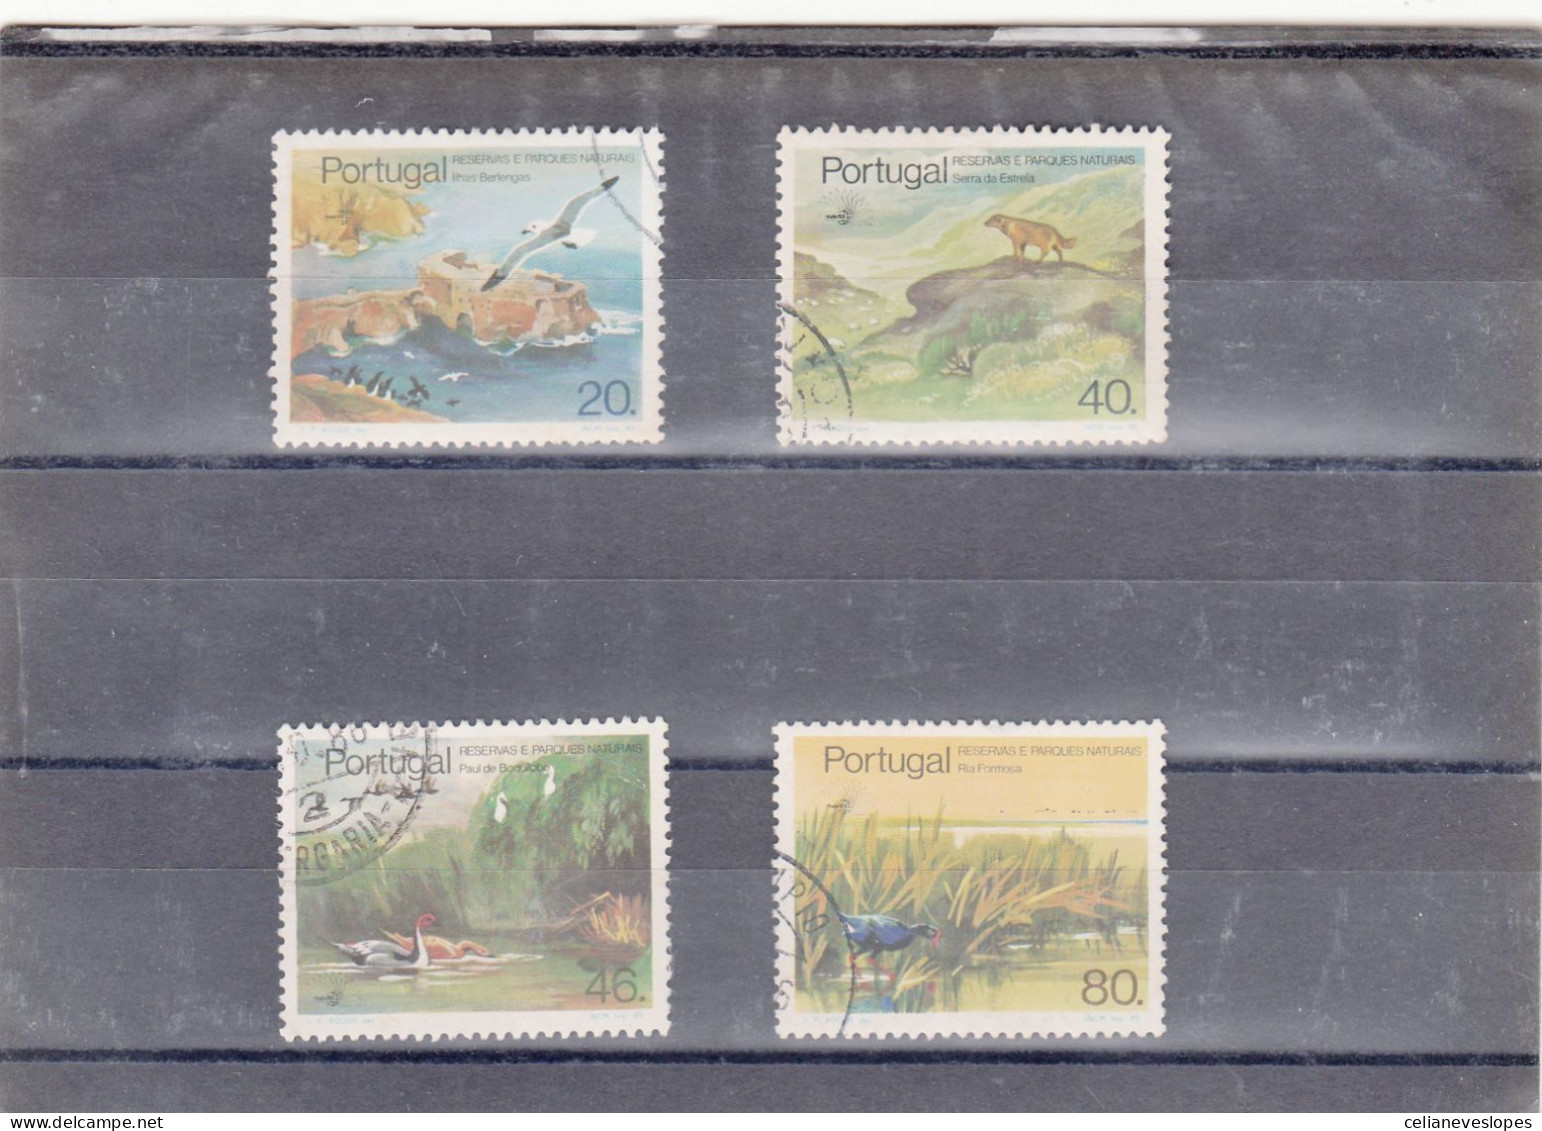 Portugal, Reservas E Parques Naturais, 1985, Mundifil Nº 1736 A 1739 Used - Used Stamps